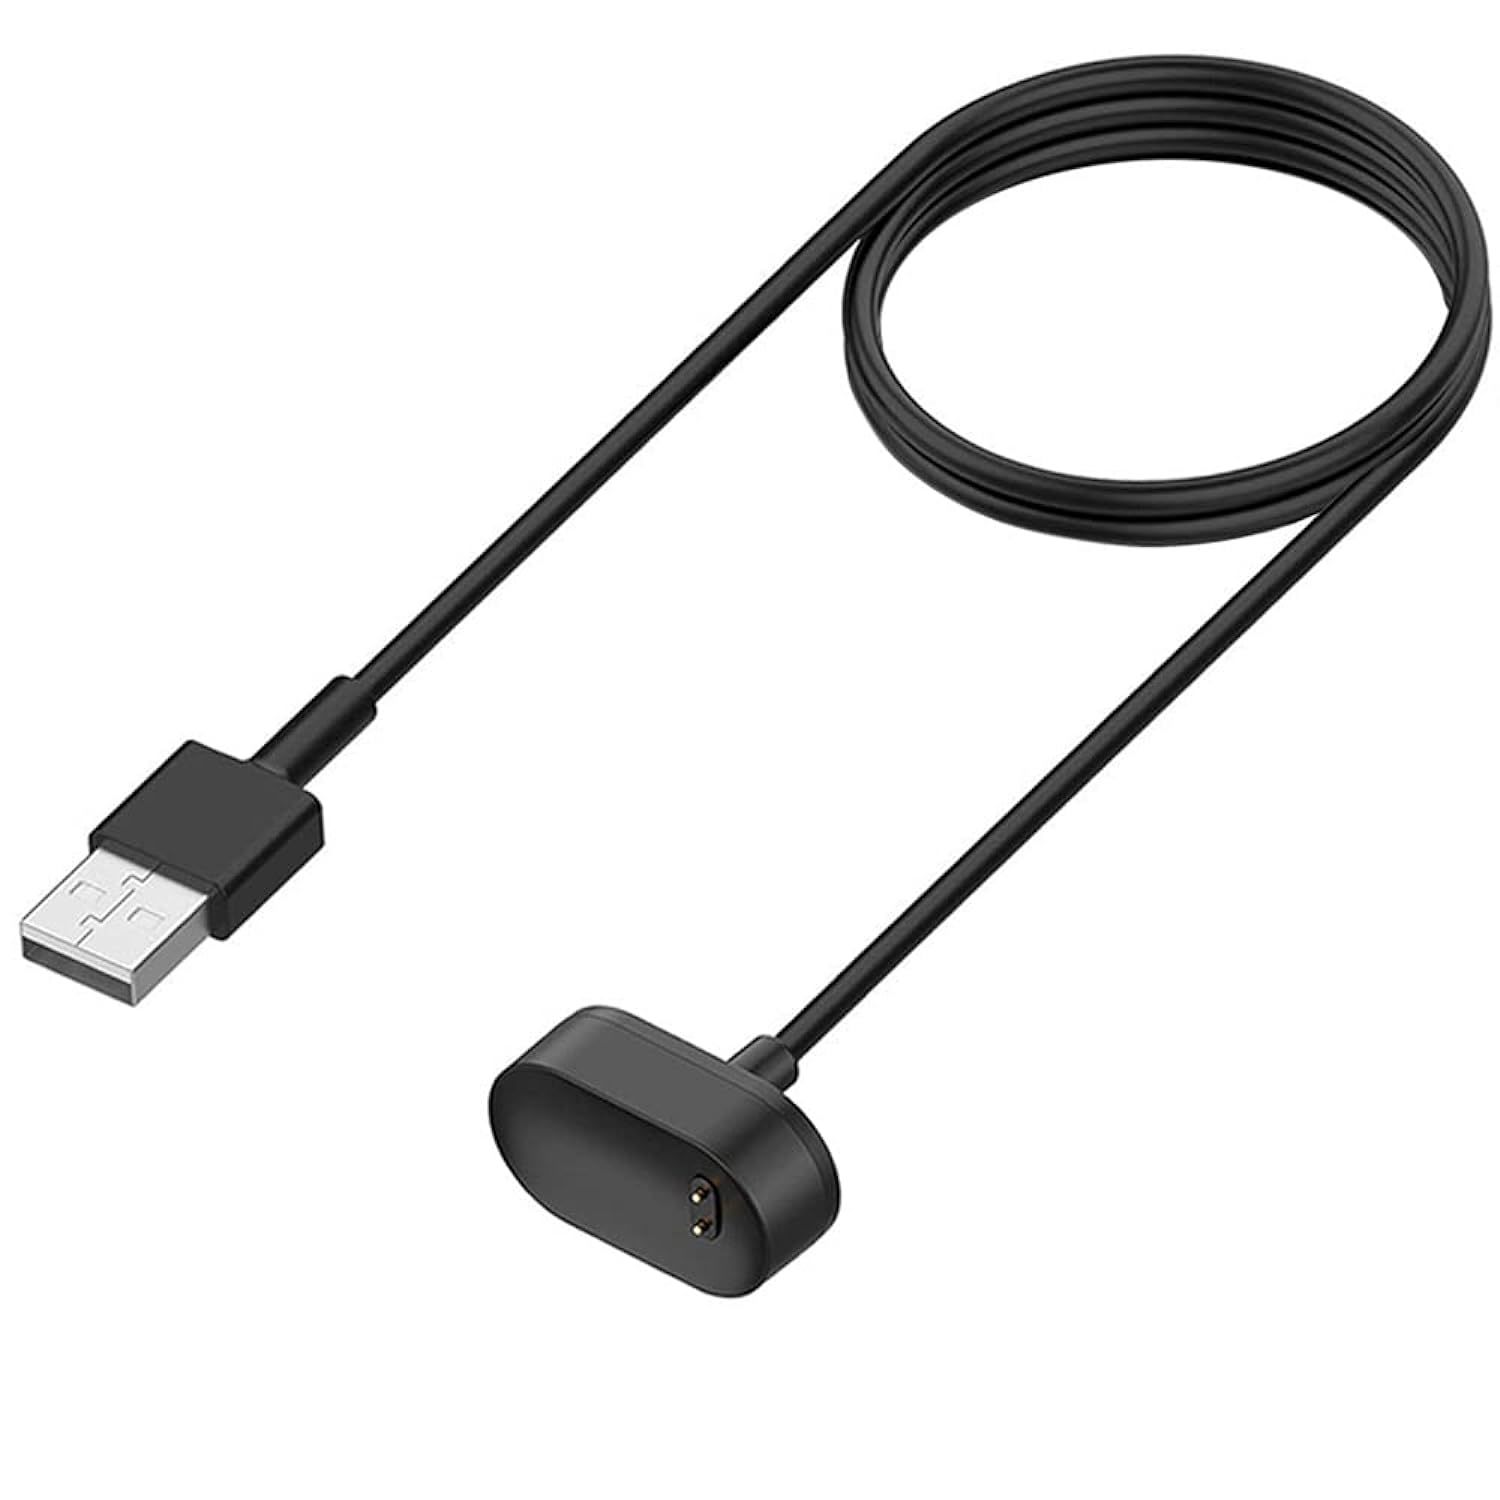 Charger For Fitbit Inspire Hr, Fitbit Inspire, Fitbit Ace 2, Replacement Usb Cha - $14.24